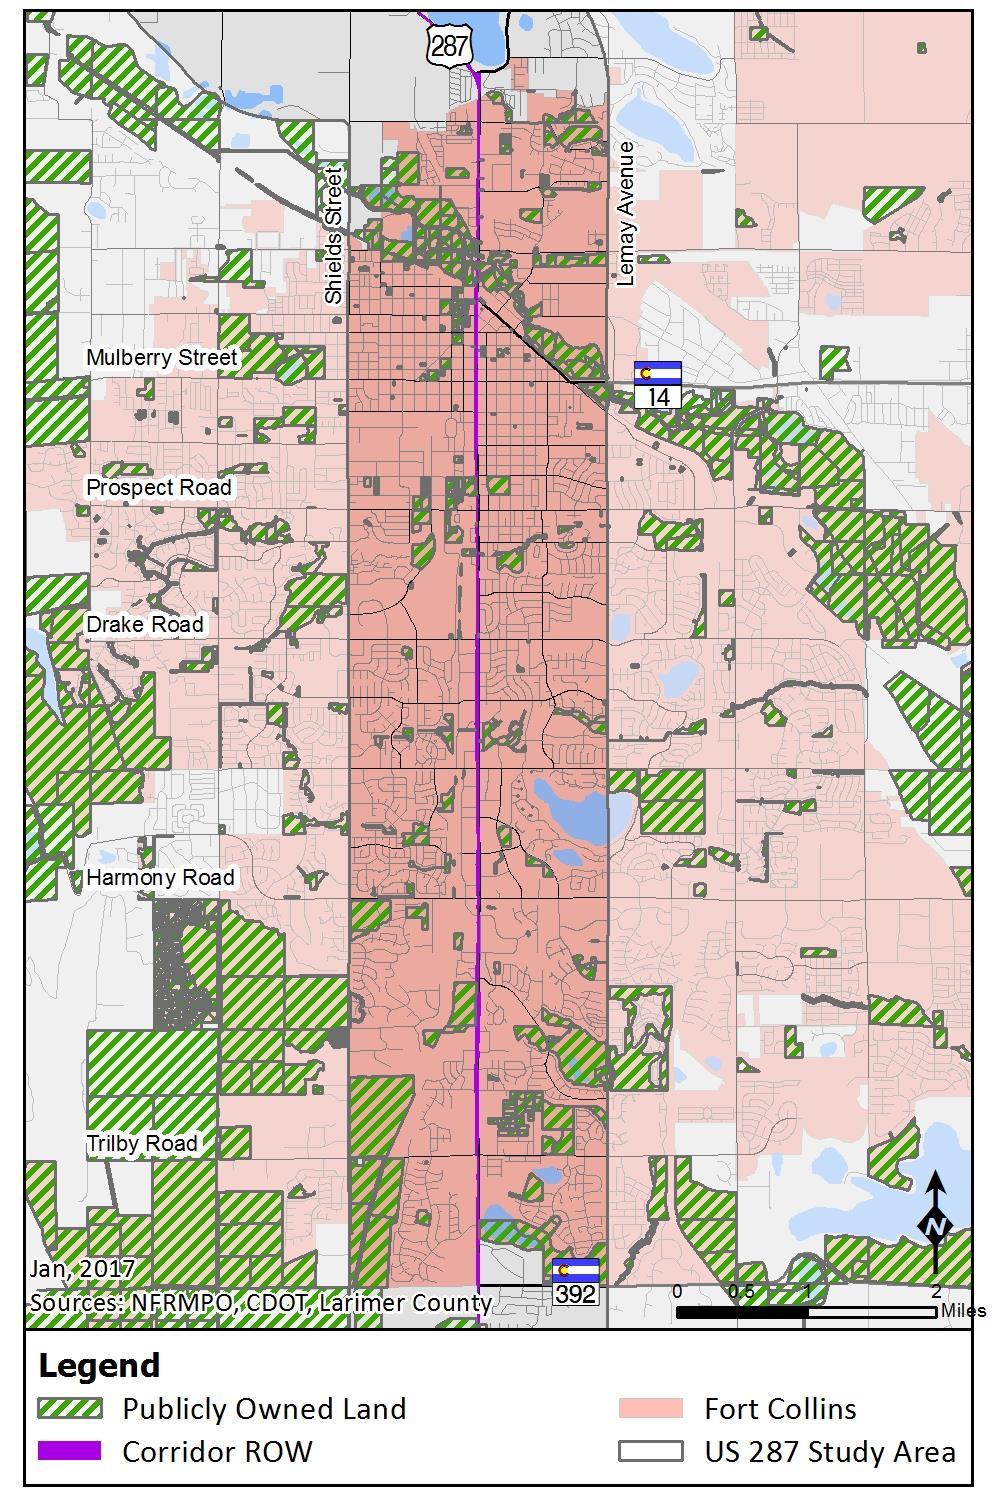 Right-of-Way An estimate of US287 right-of-way is shown on Figure 5-9. Based on Larimer County parcel data, the right-of-way is colored where there is no existing property owner.